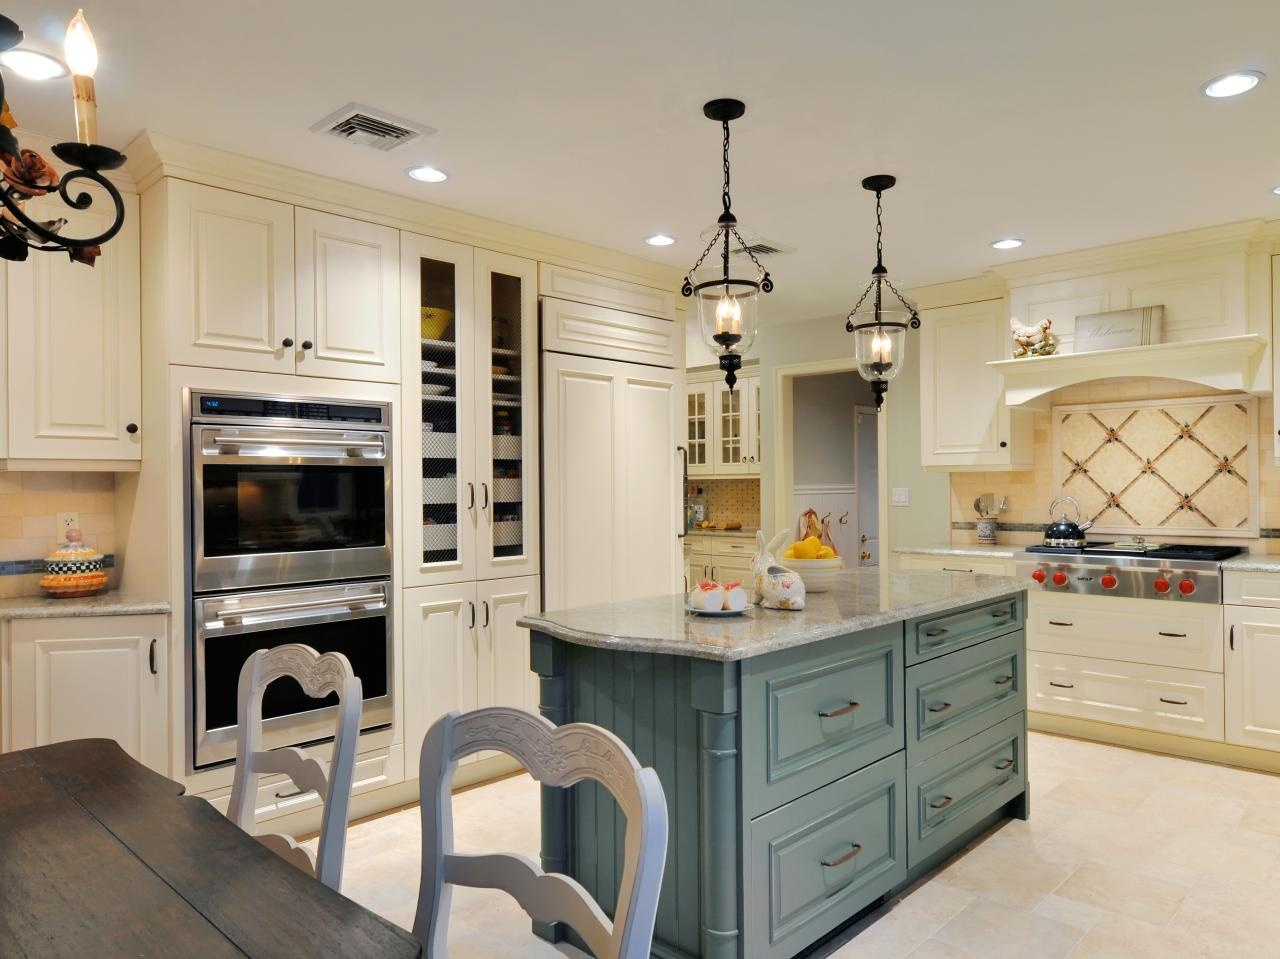 French Country Kitchen Cabinets You Ll Love In 2021 Visualhunt